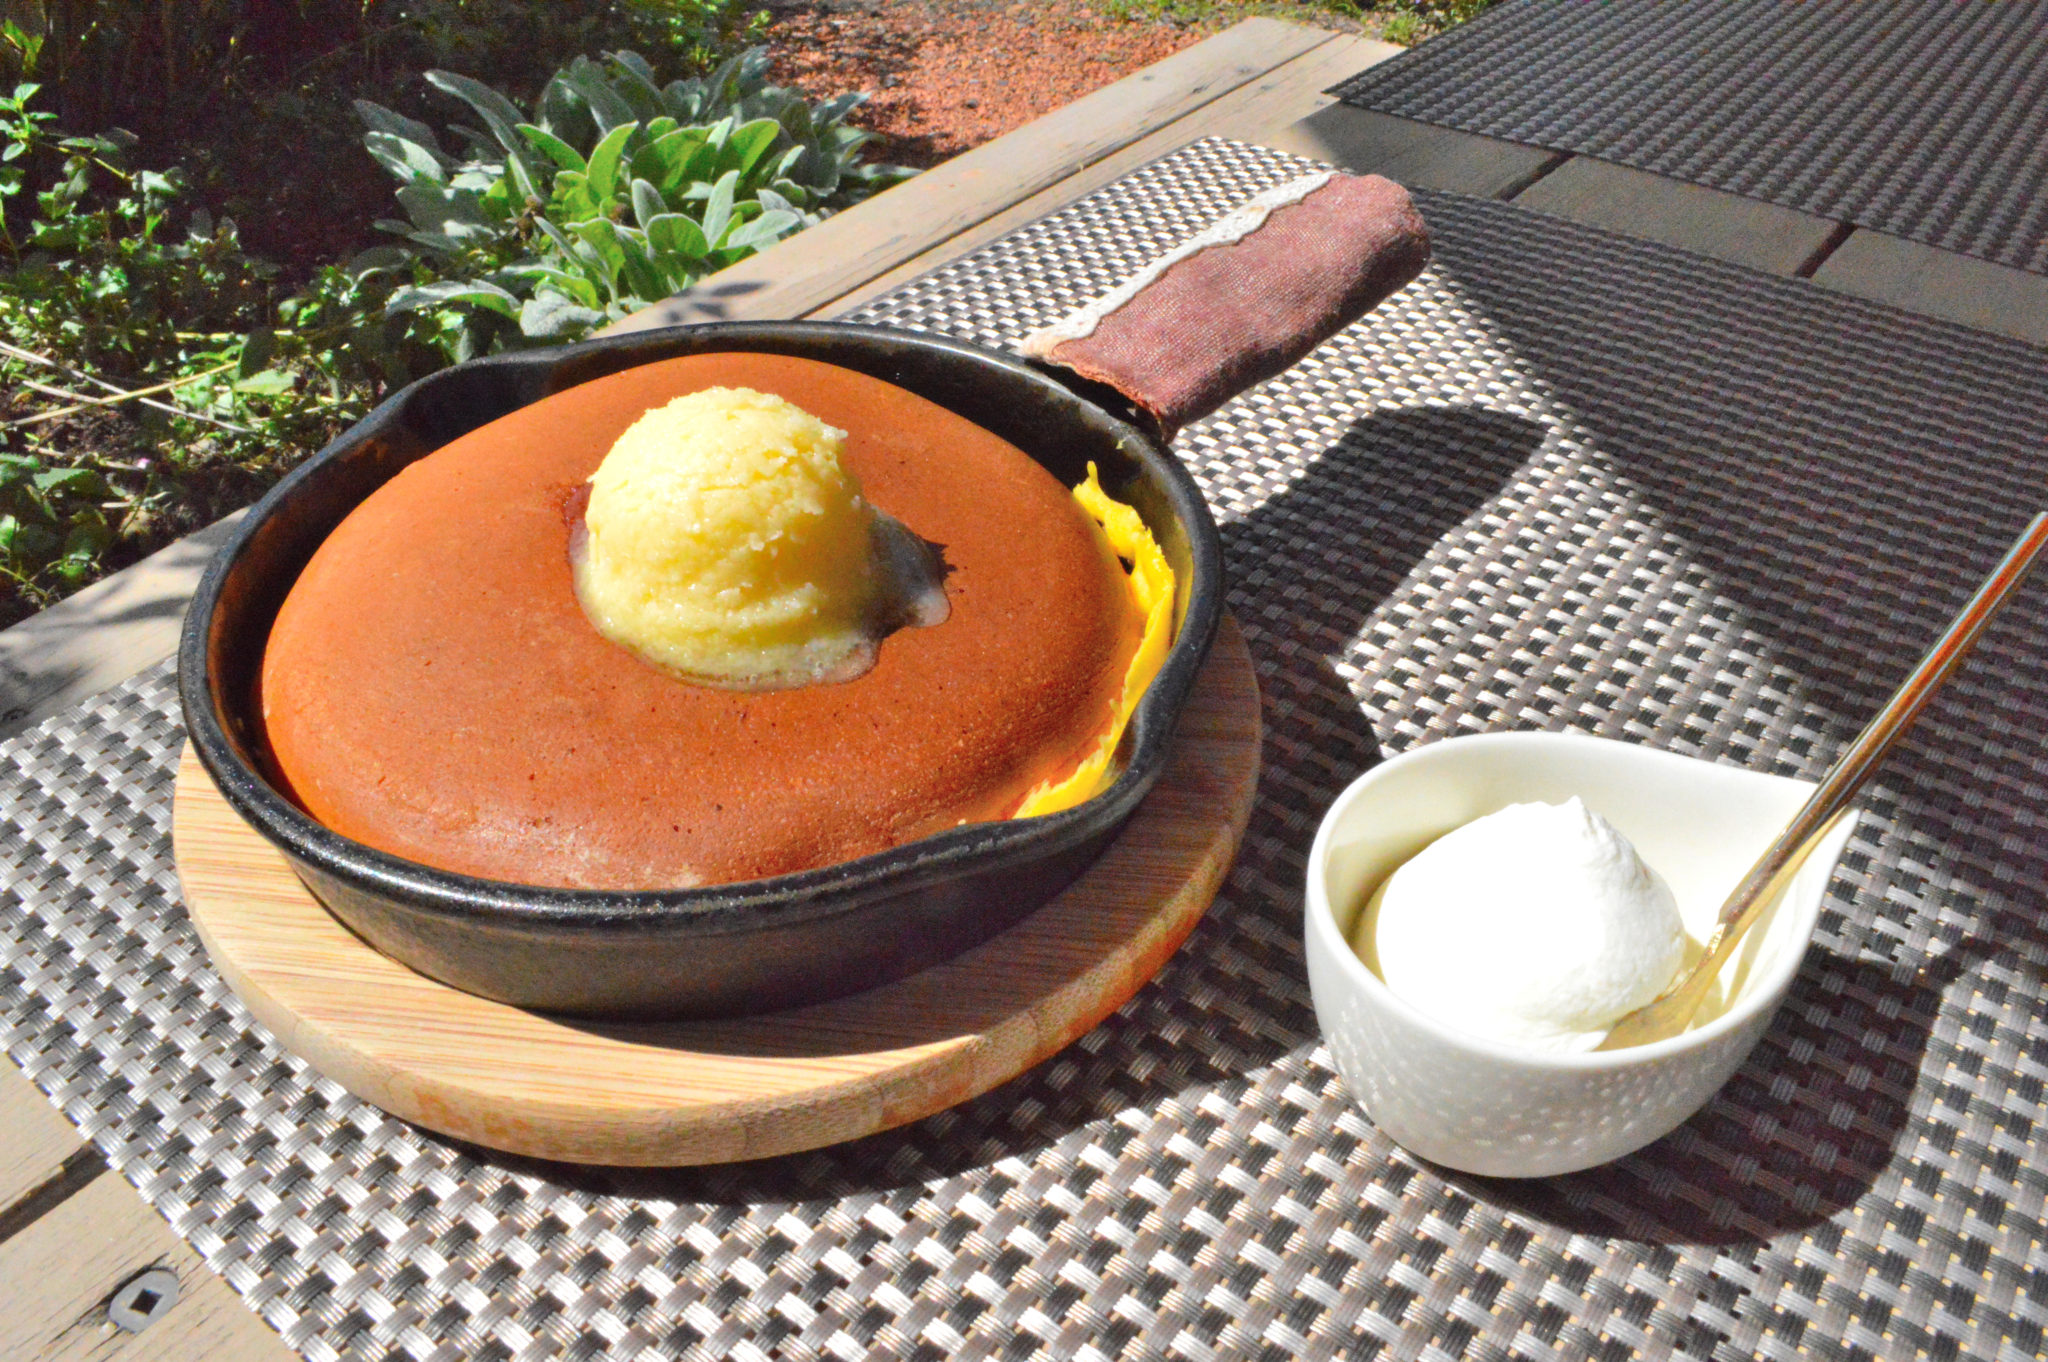 [Feature] Relax with fluffy pancakes at the popular Hachimitsu Garden Café